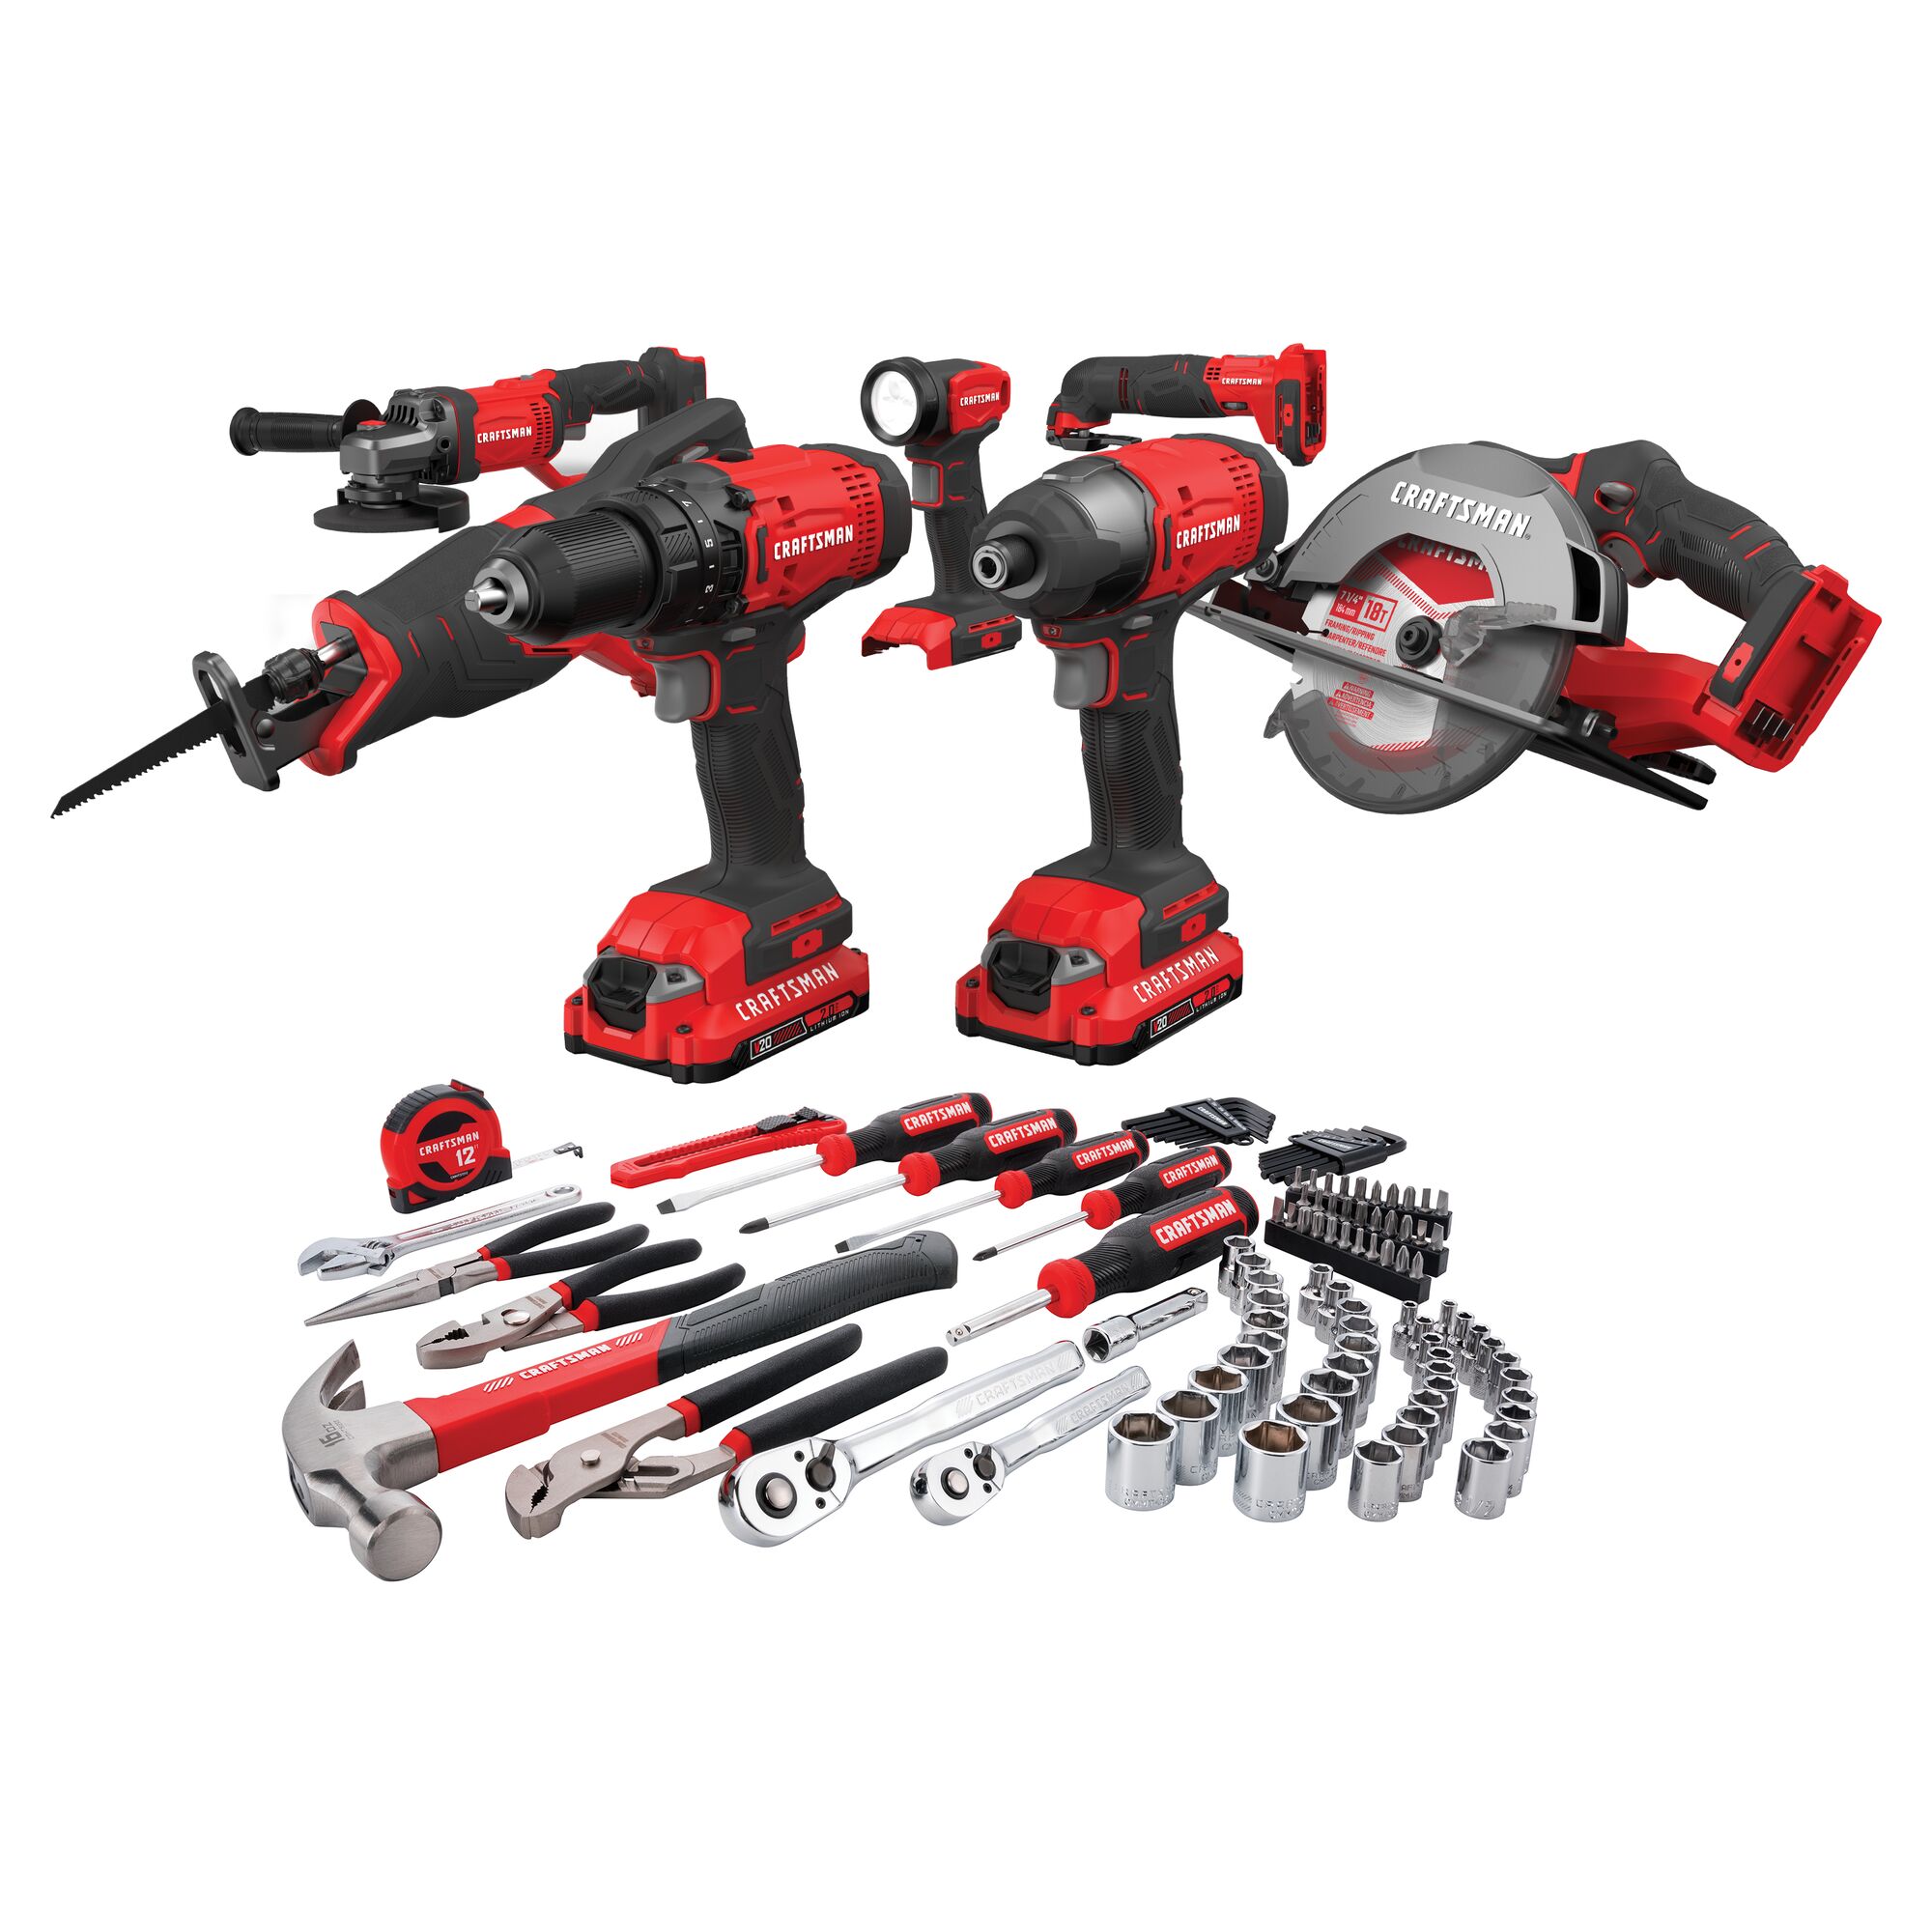 View of CRAFTSMAN Combo Kits: Power Tools family of products